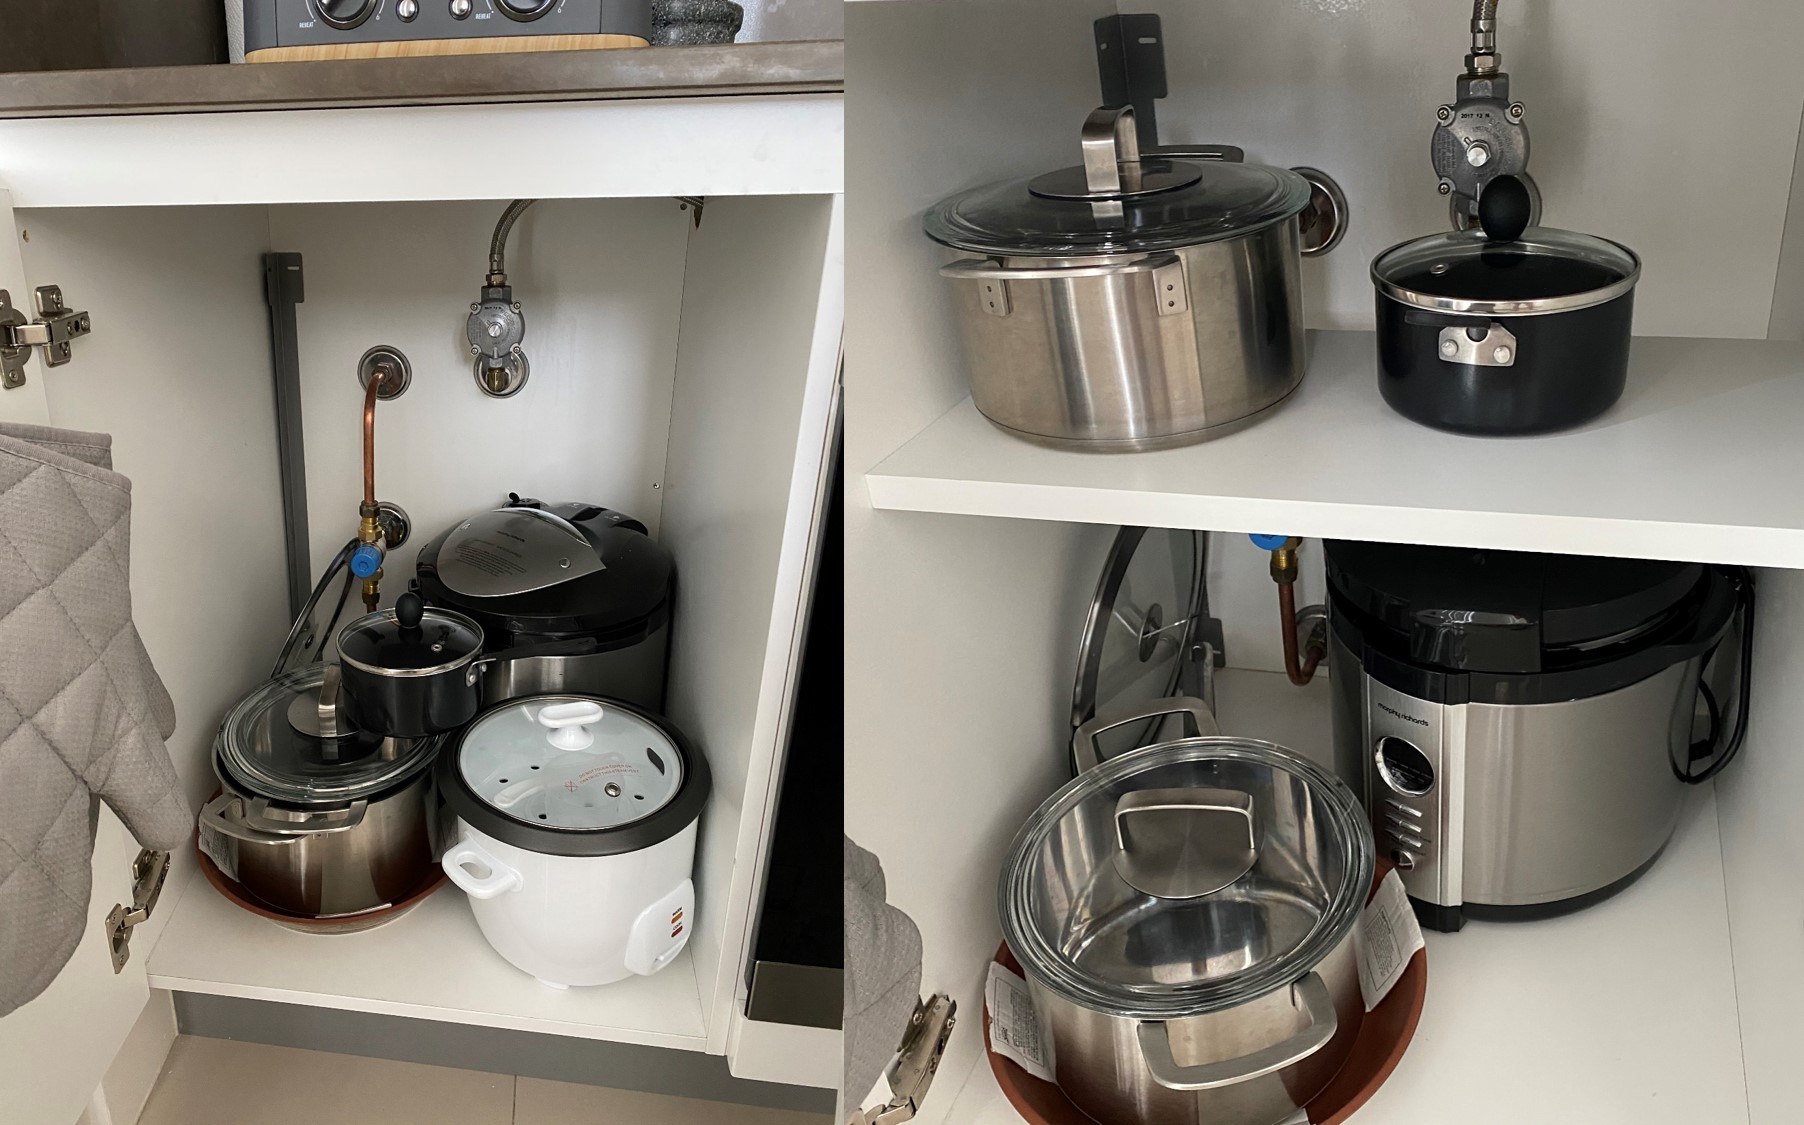 https://www.the-diy-life.com/wp-content/uploads/2020/01/How-To-Add-An-Extra-Storage-Shelf-To-Your-Cluttered-Kitchen-Cabinet-For-2.jpg